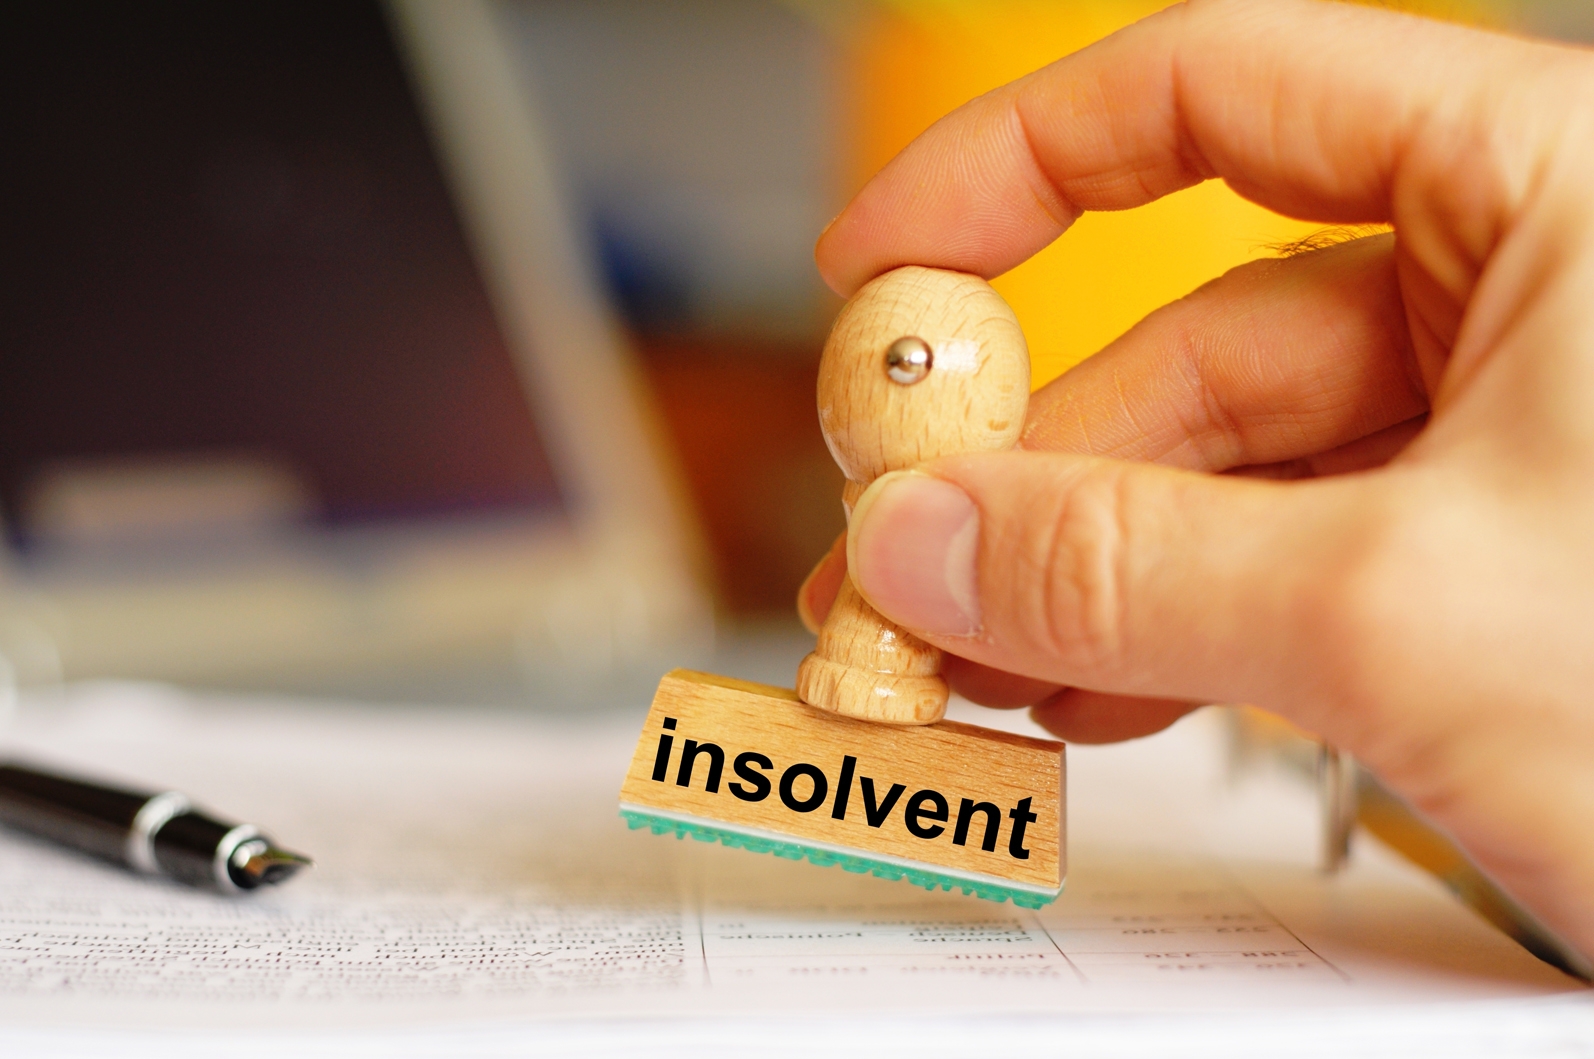 insolvent 11523500